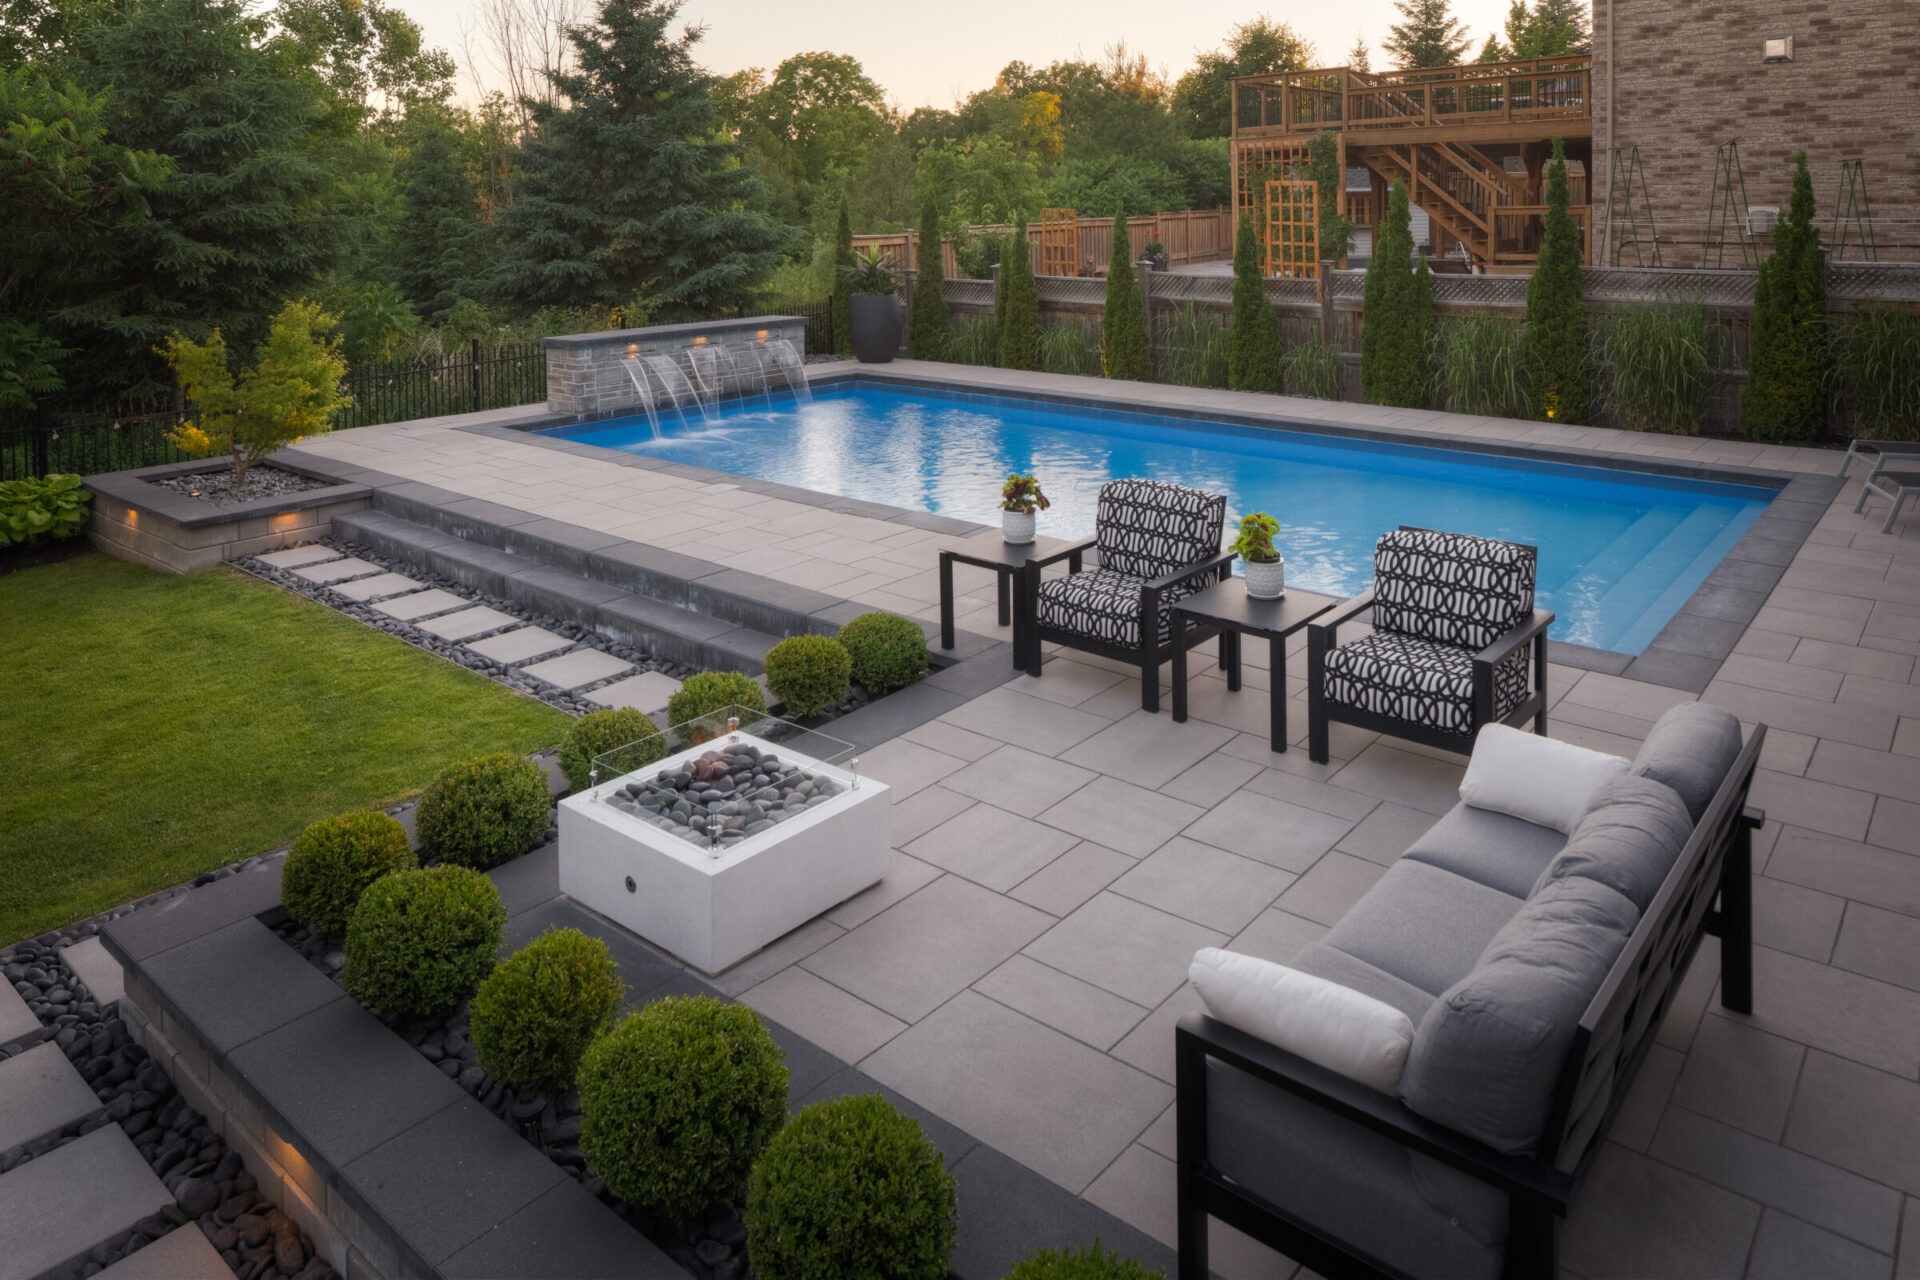 Elegant backyard featuring a blue swimming pool, patio with modern outdoor furniture, landscaped lawn, and a multi-level wooden deck at dusk.